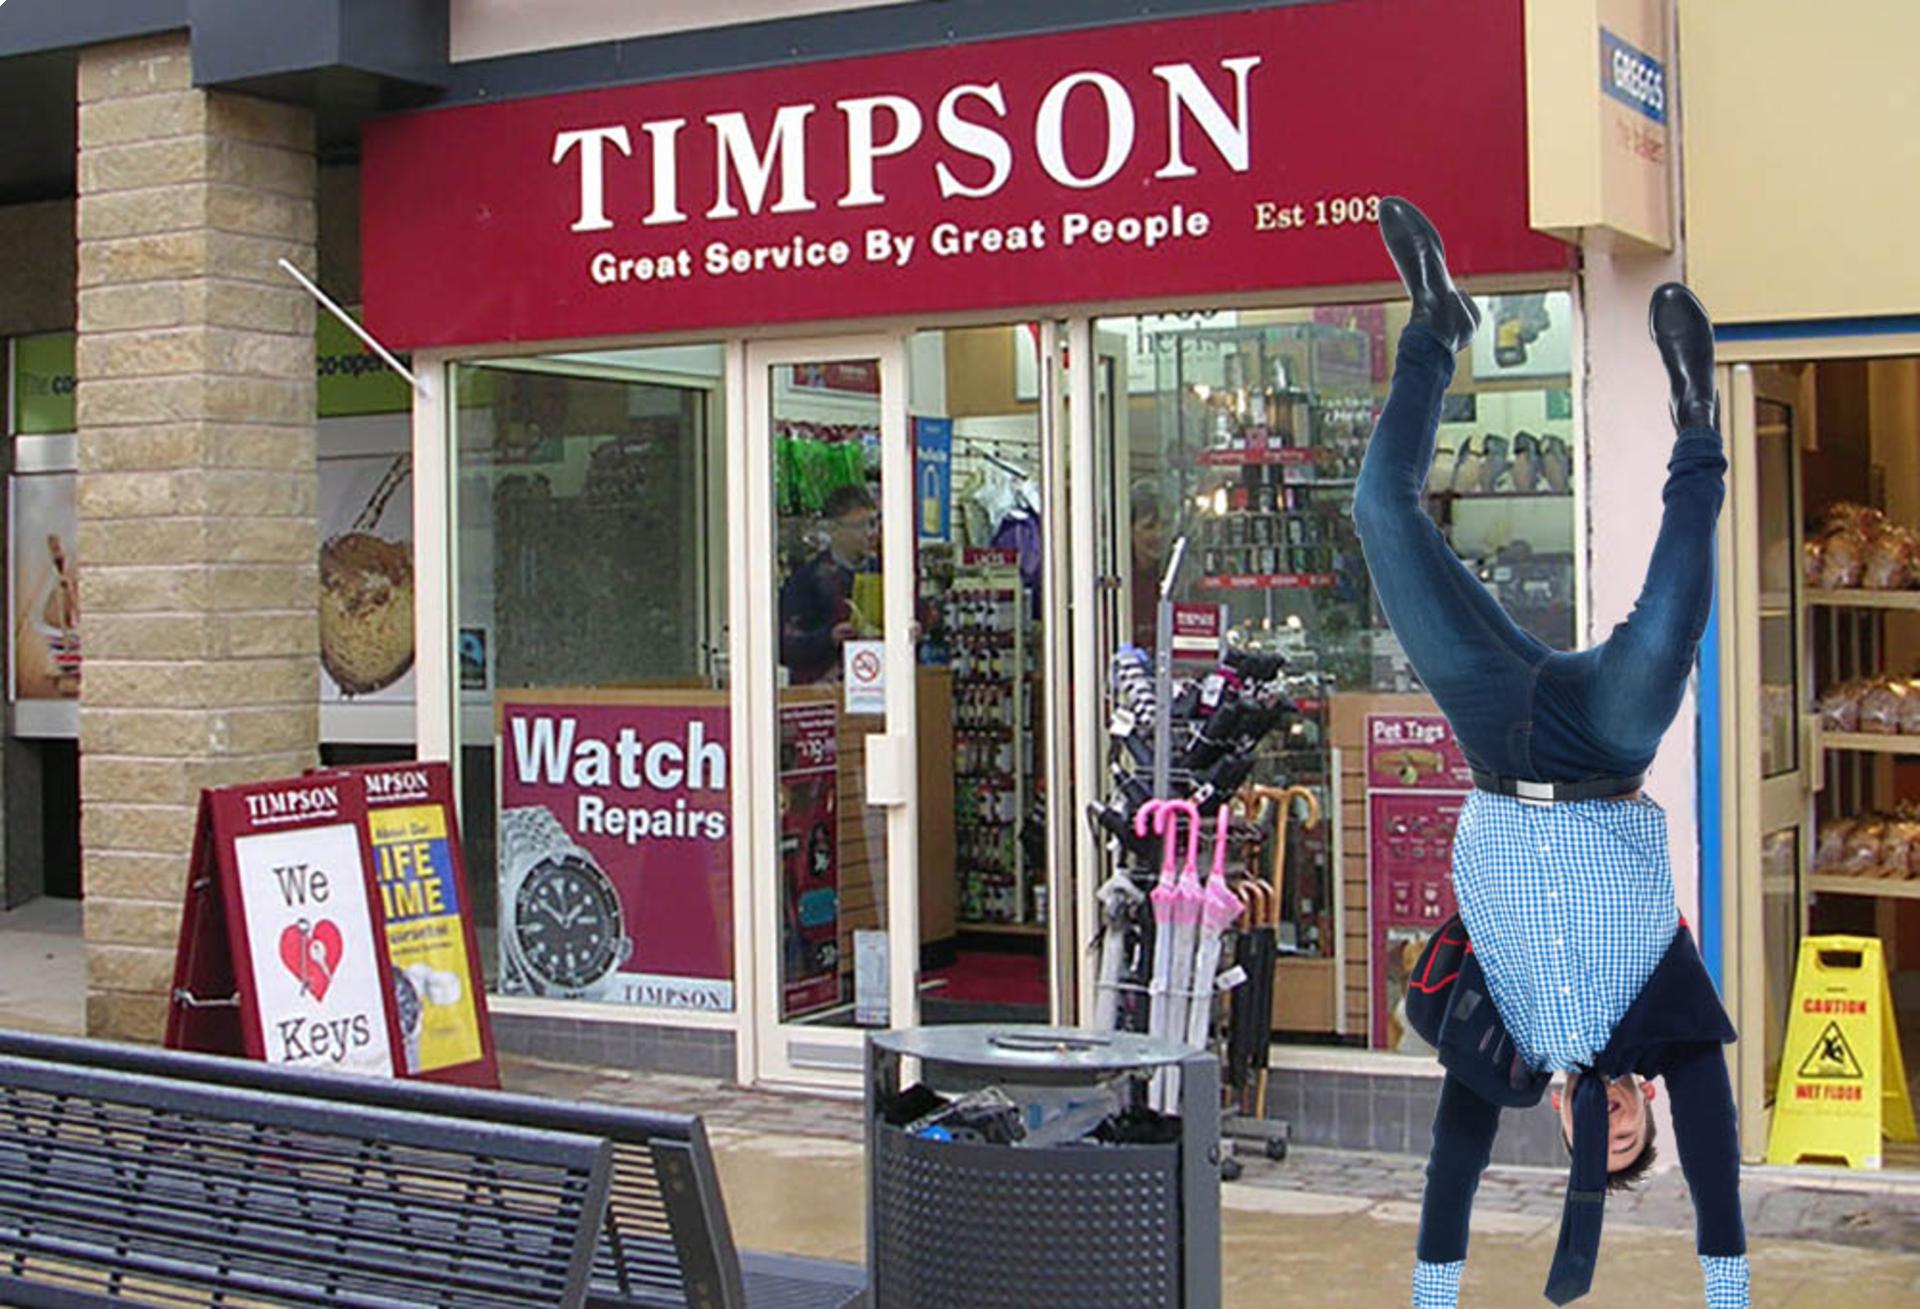 Upside Down Management - will more business leaders operate like Timpson post-pandemic?